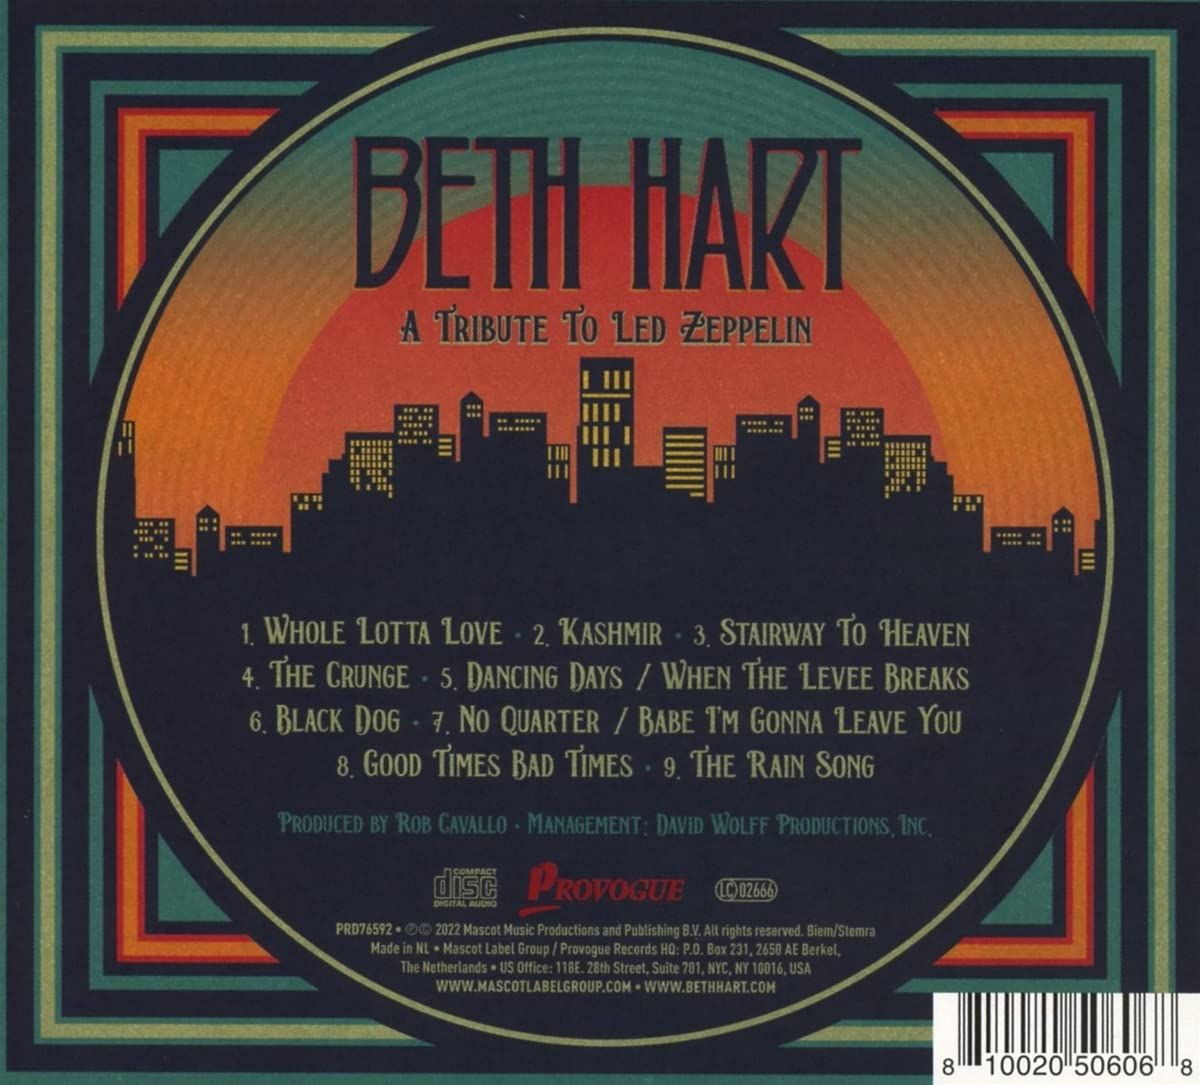 Hart, Beth - Tribute To Led Zeppelin, A - CD - New